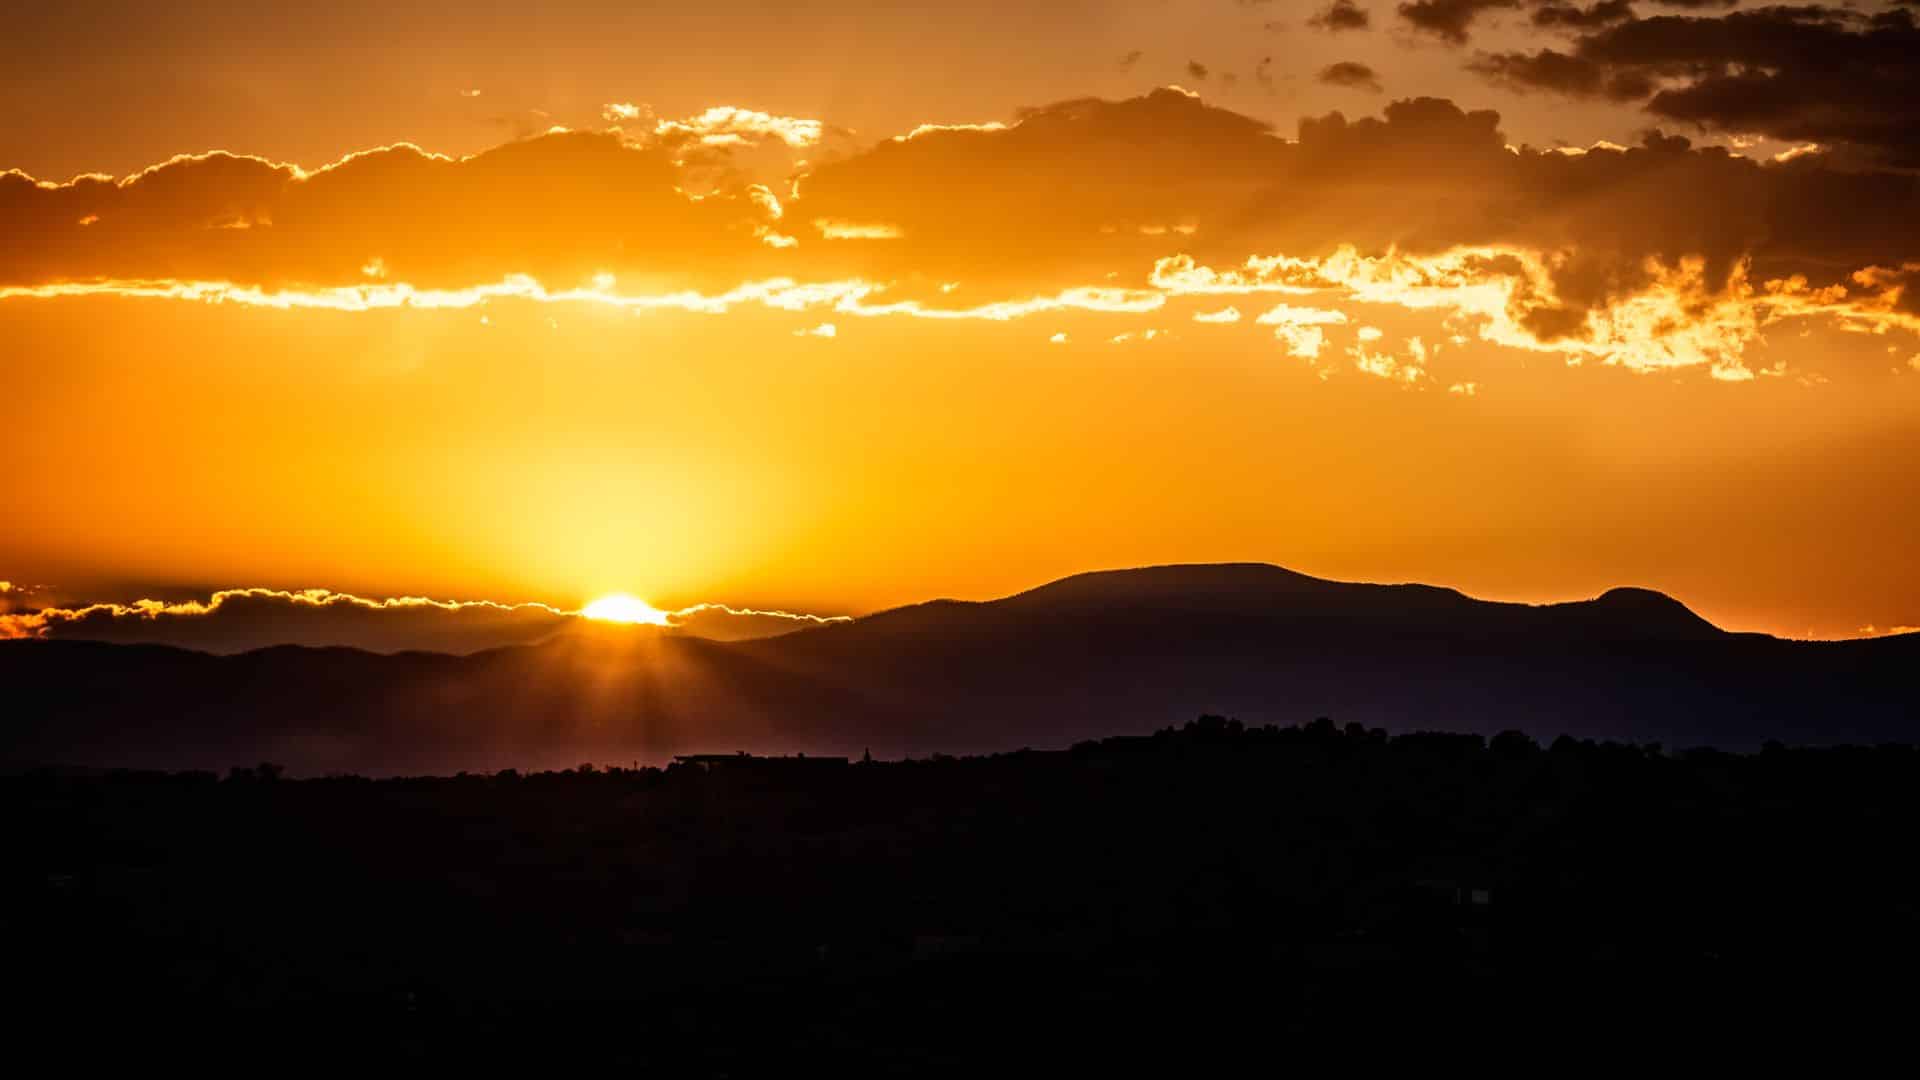 Glorious golden sunset over the mountains of Santa Fe.